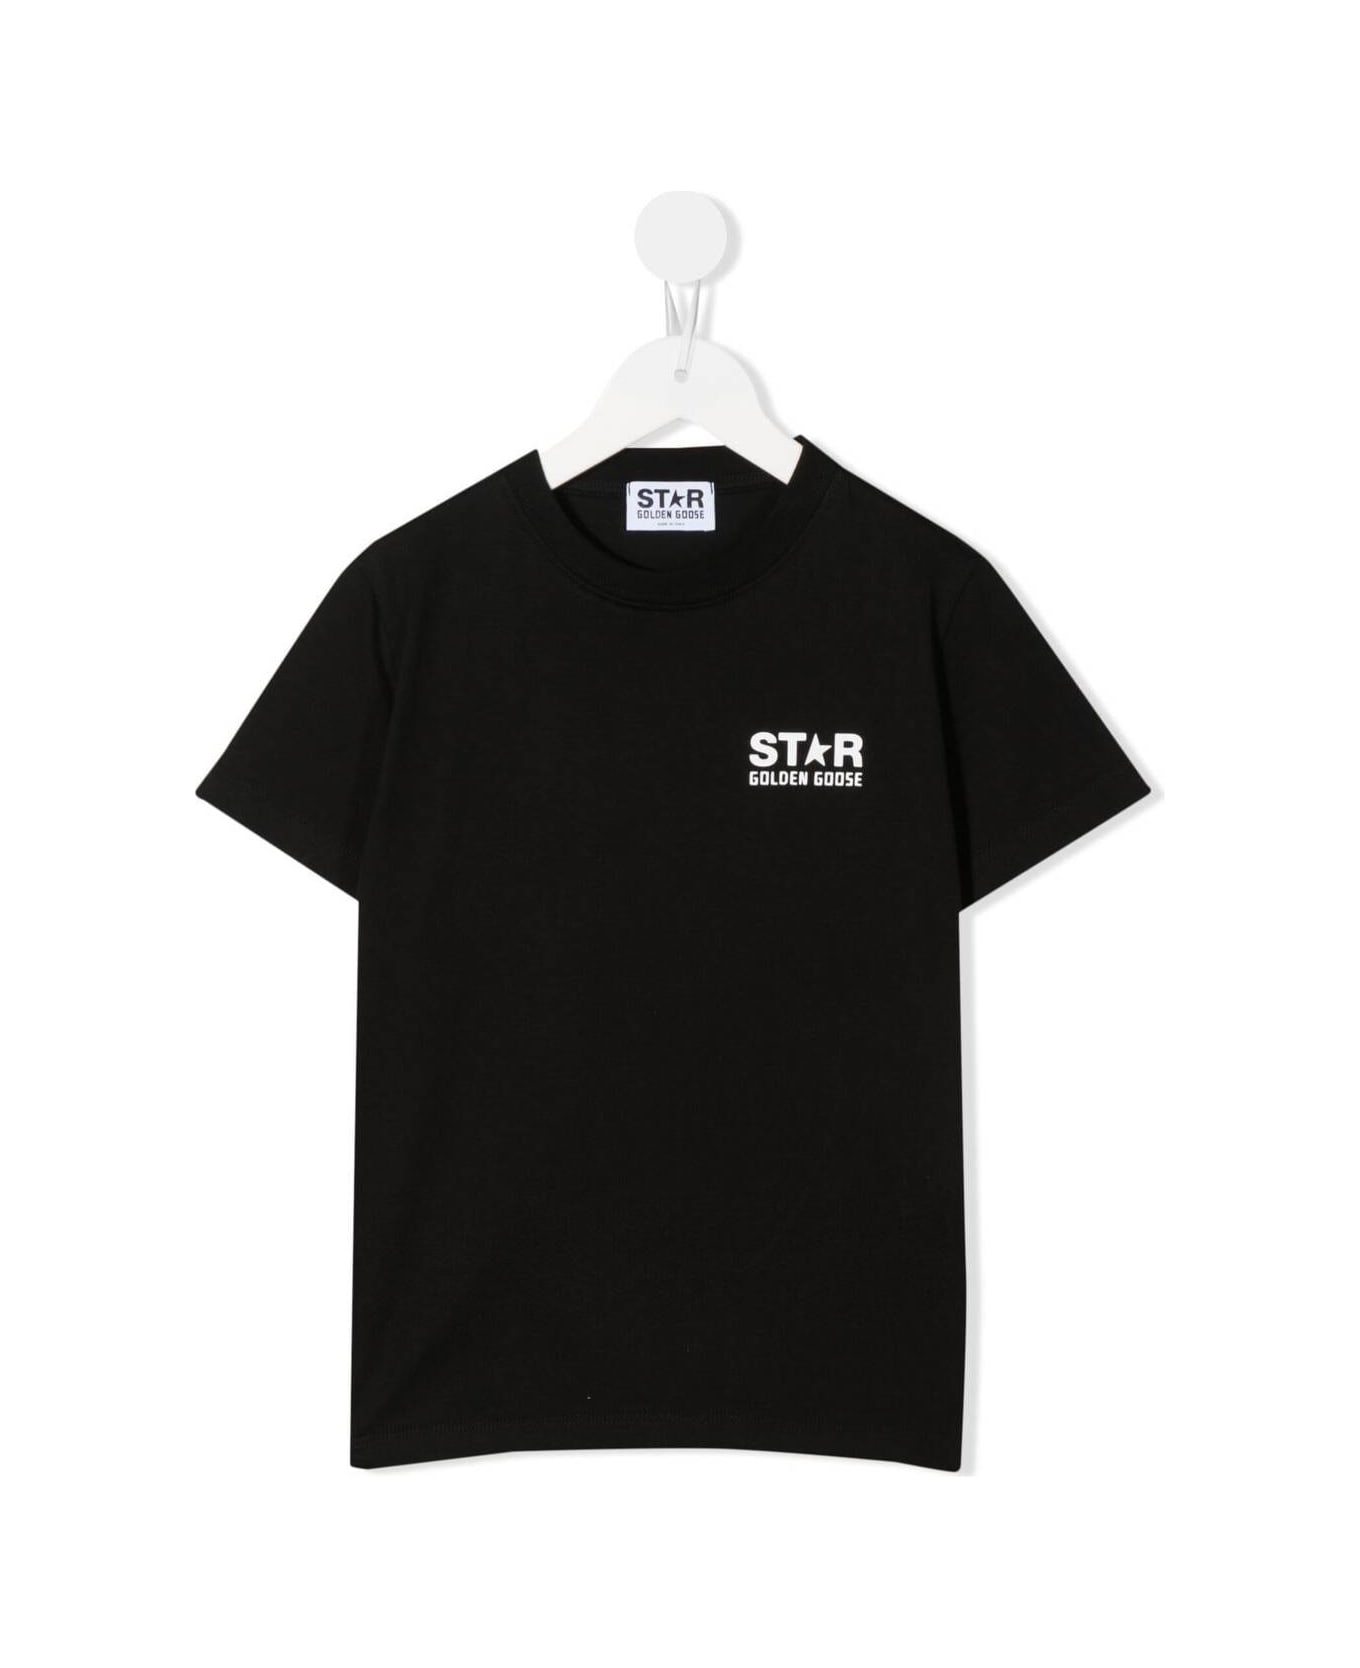 Golden Goose Star/ Boy's T-shirt S/s Logo Big Star Printed Include Cod Gyp - Black Tシャツ＆ポロシャツ